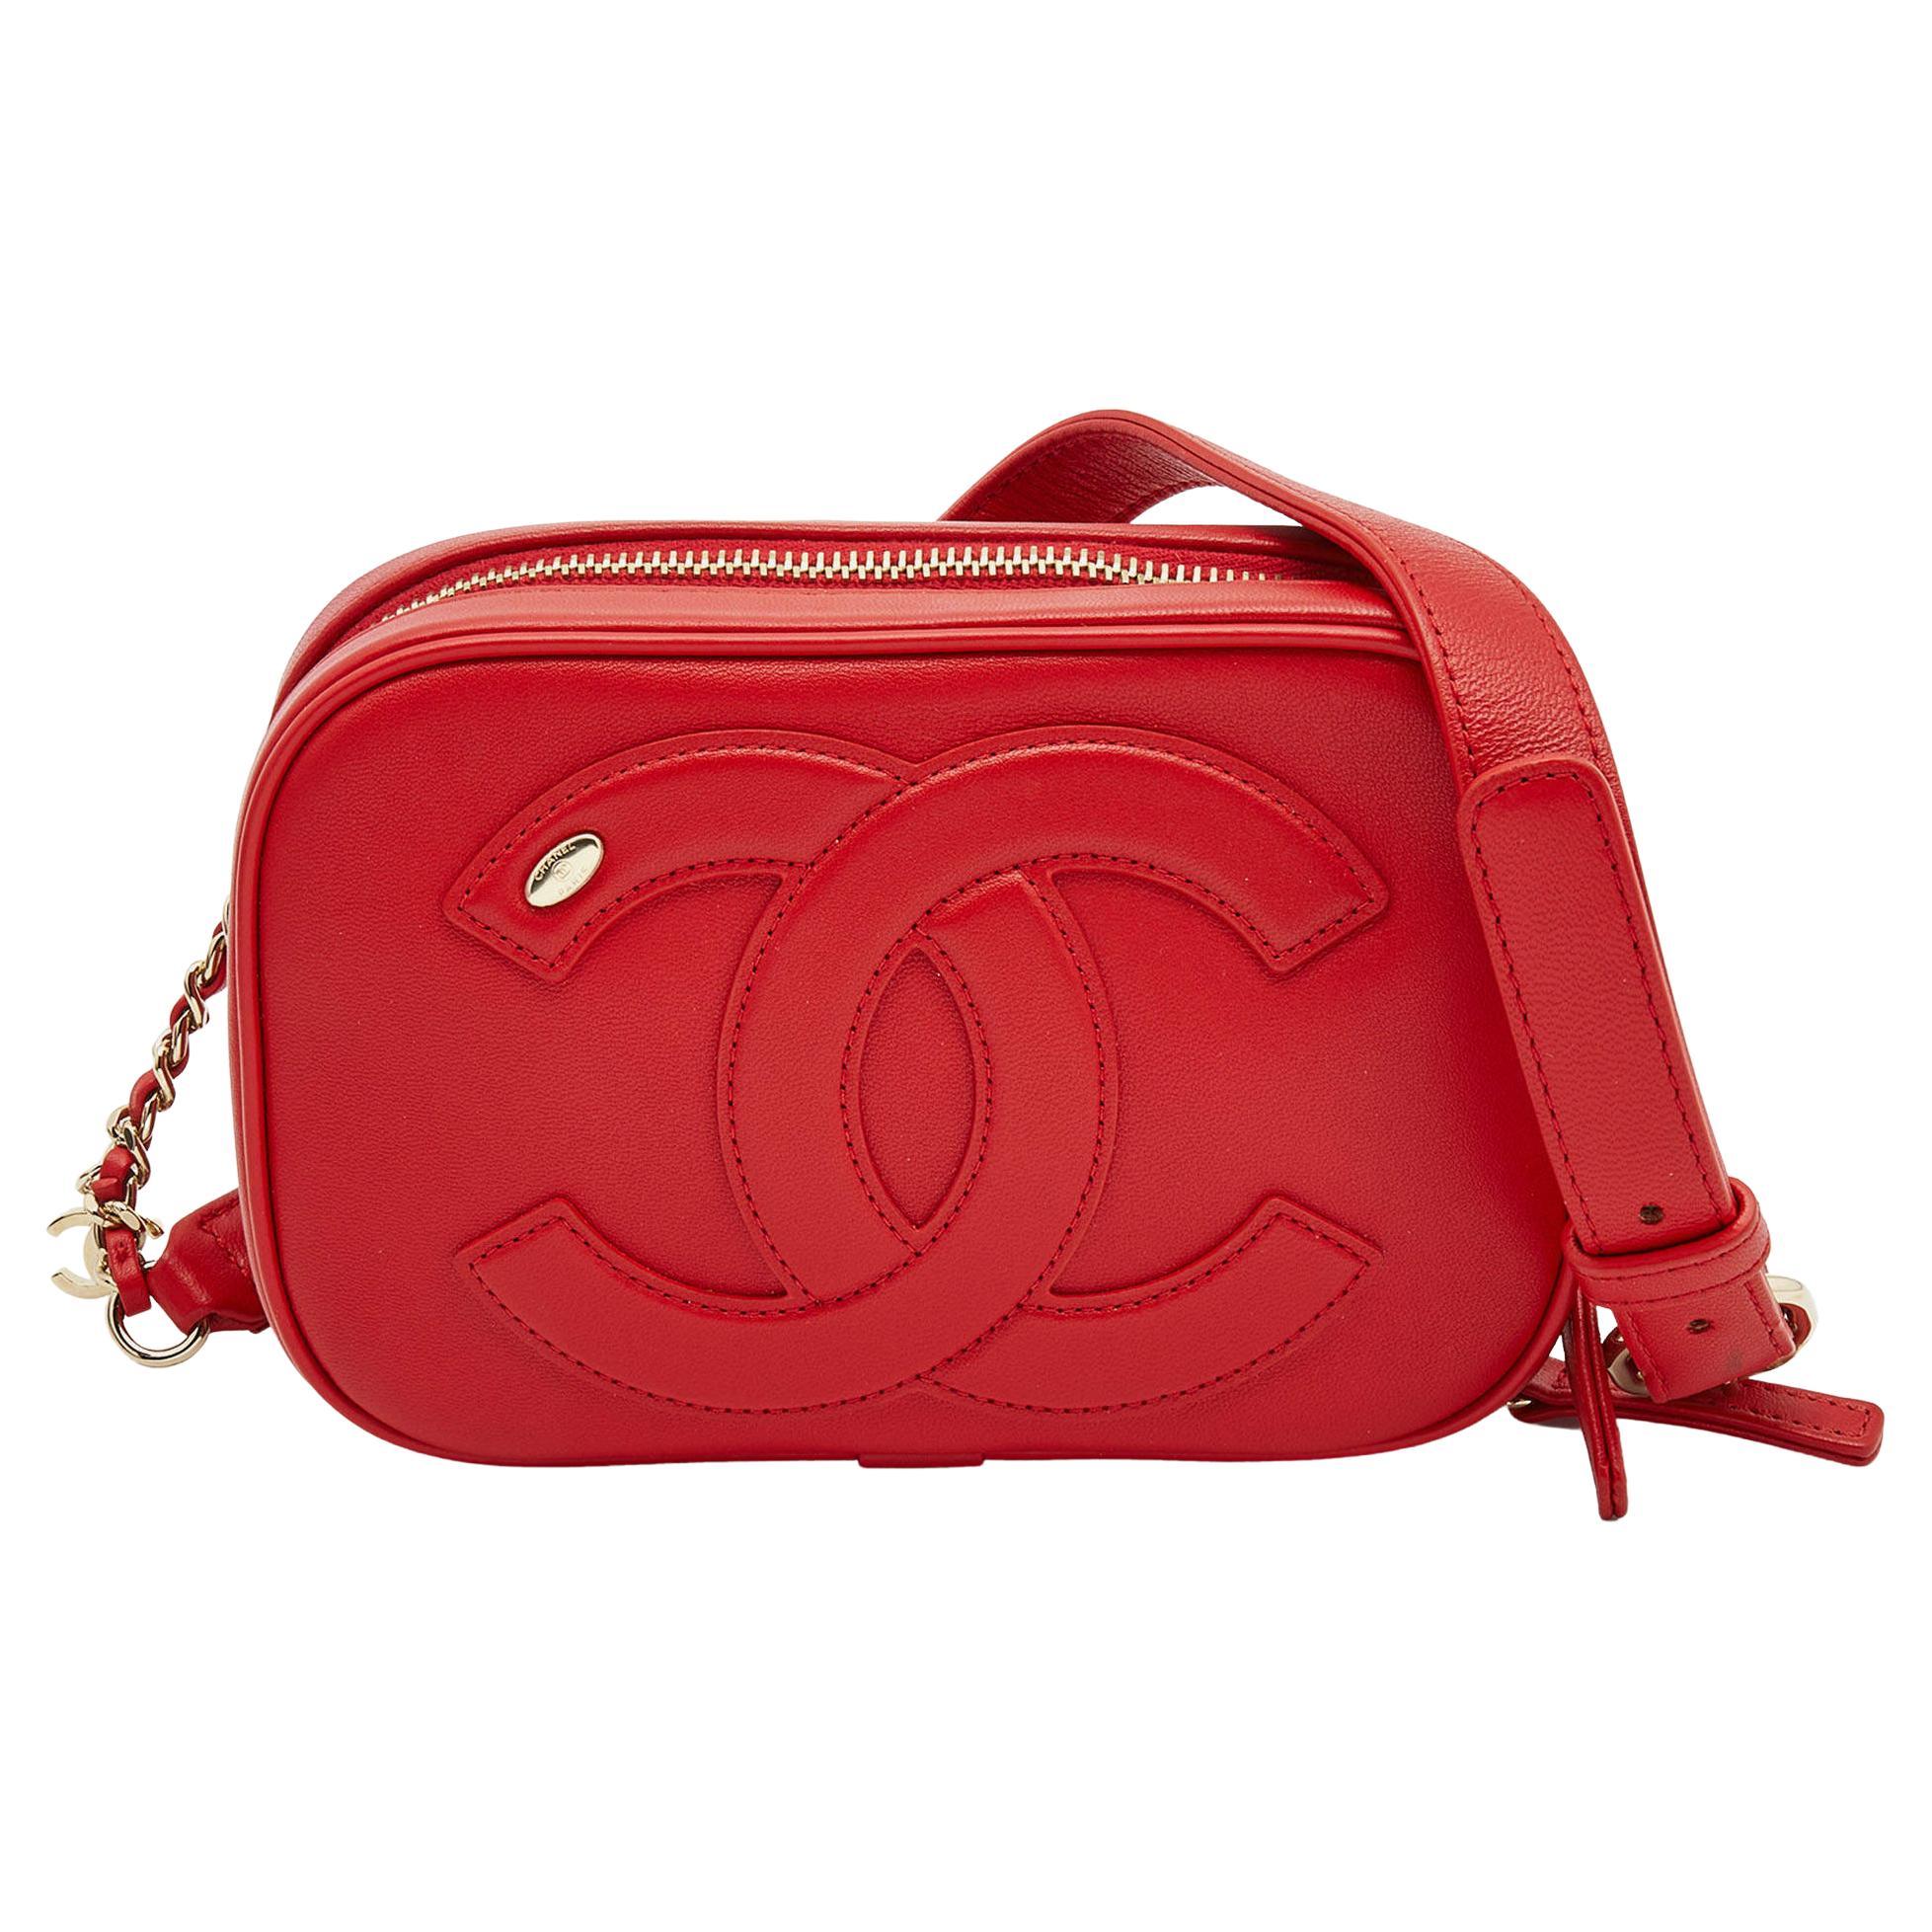 New Gucci Red Leather Logo Fanny Pack Belt Bag with Box For Sale at ...